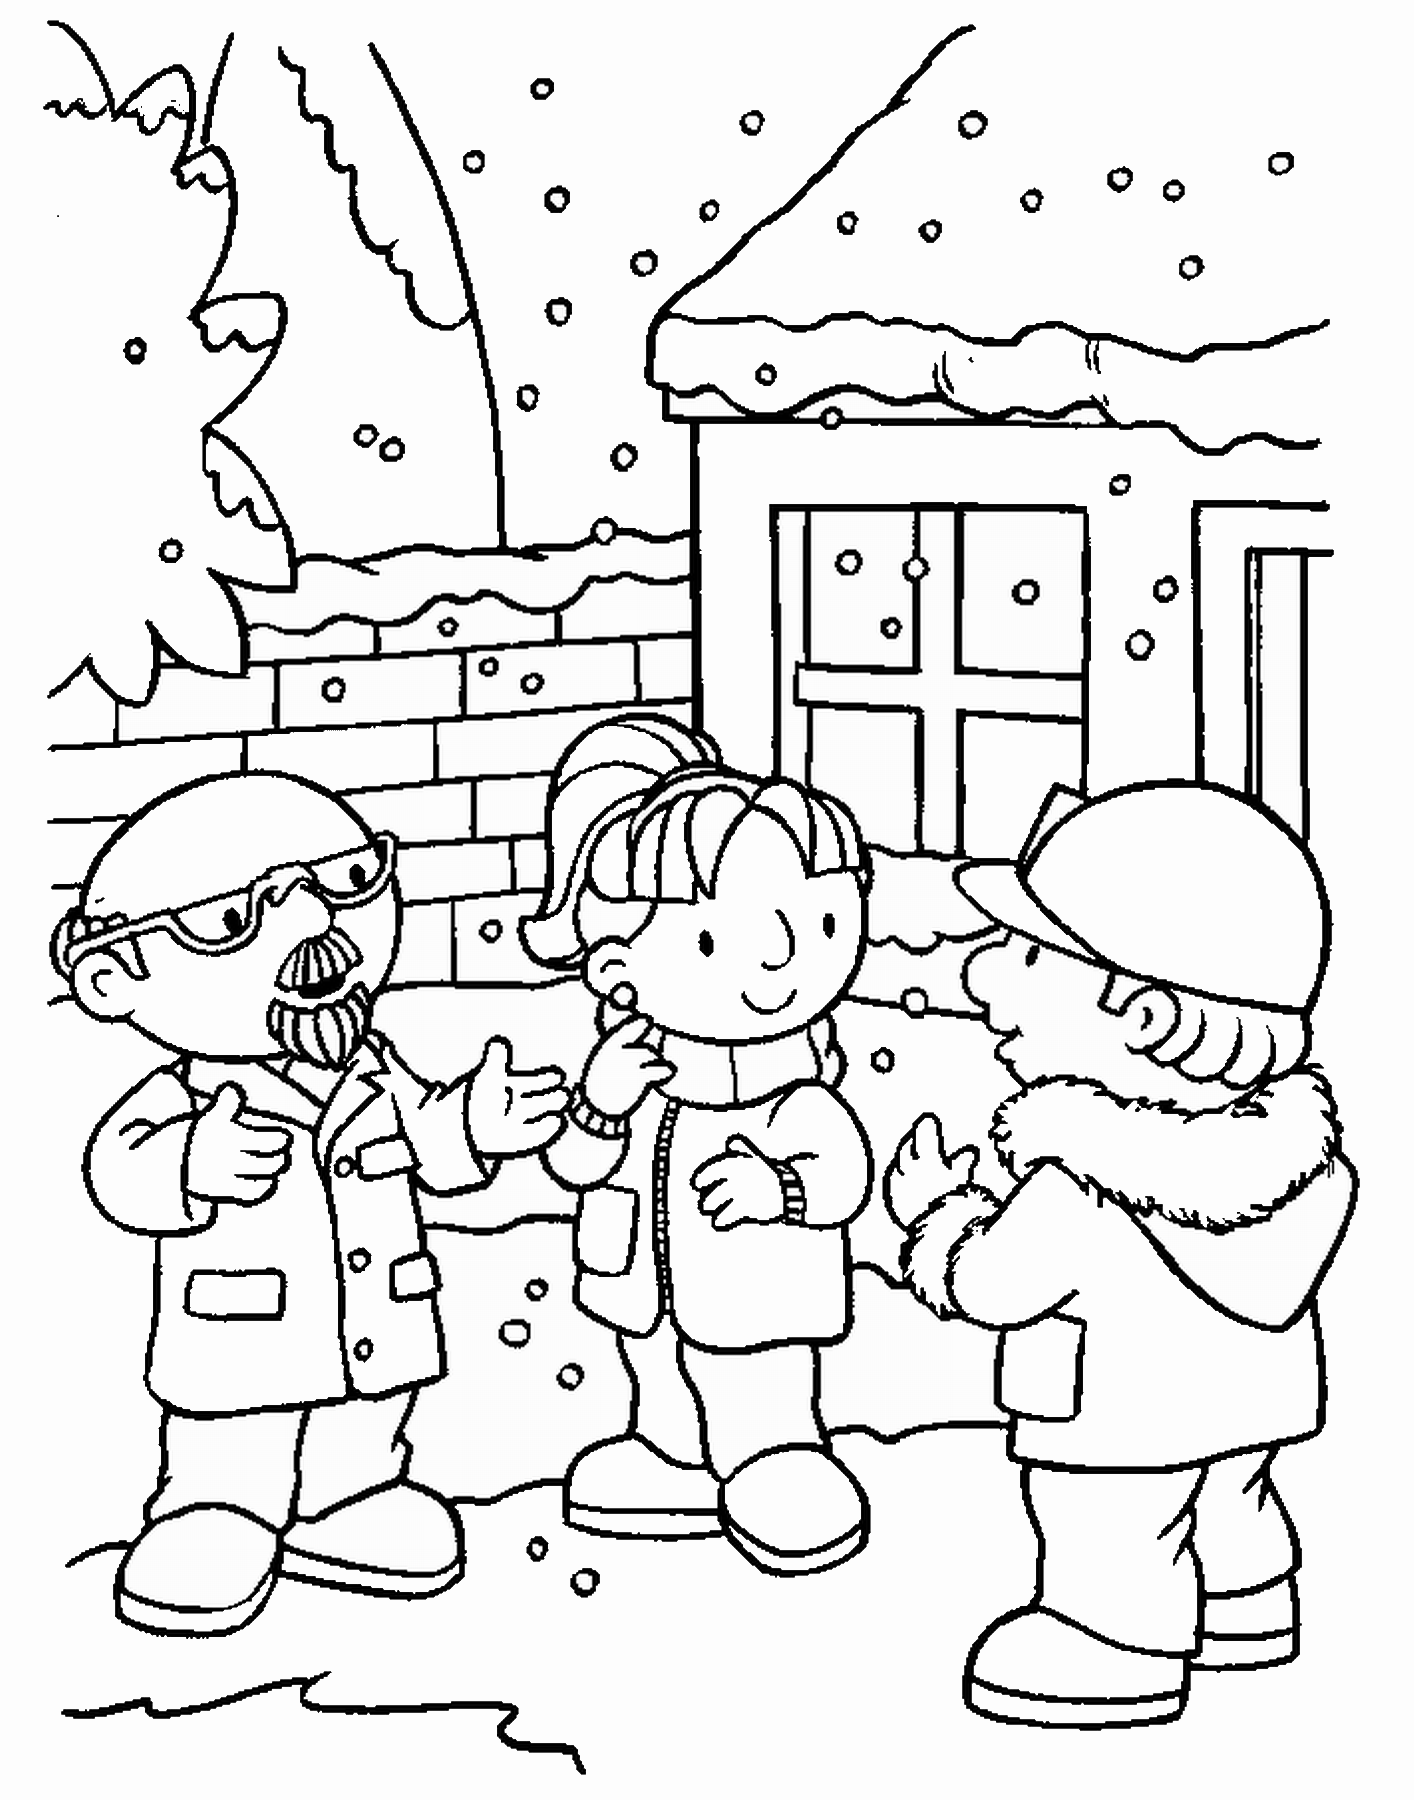 Bob the Builder Coloring Pages TV Film bob the builder_31 Printable 2020 00981 Coloring4free